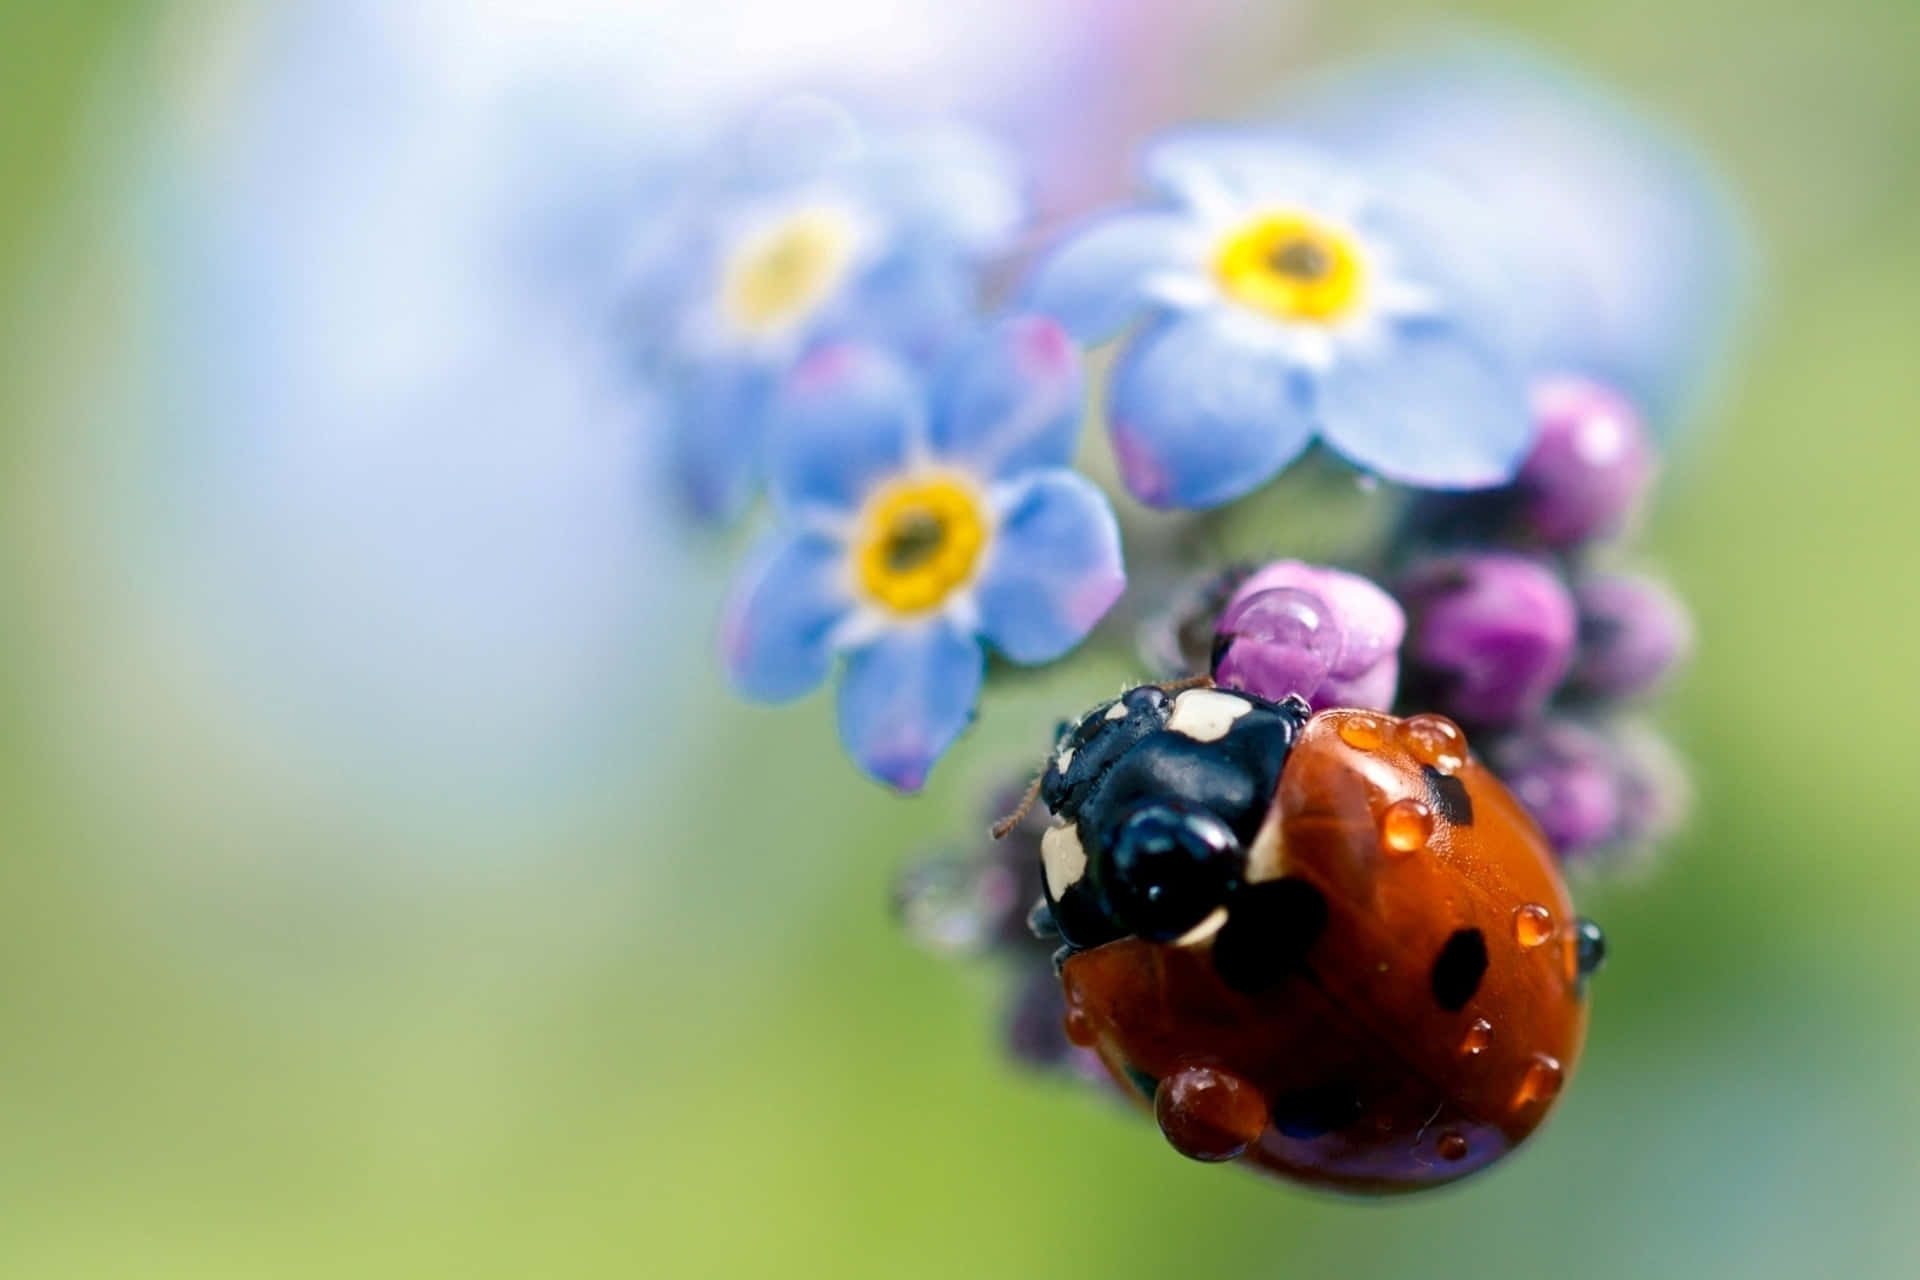 Get up close and personal with a bouncy ladybug